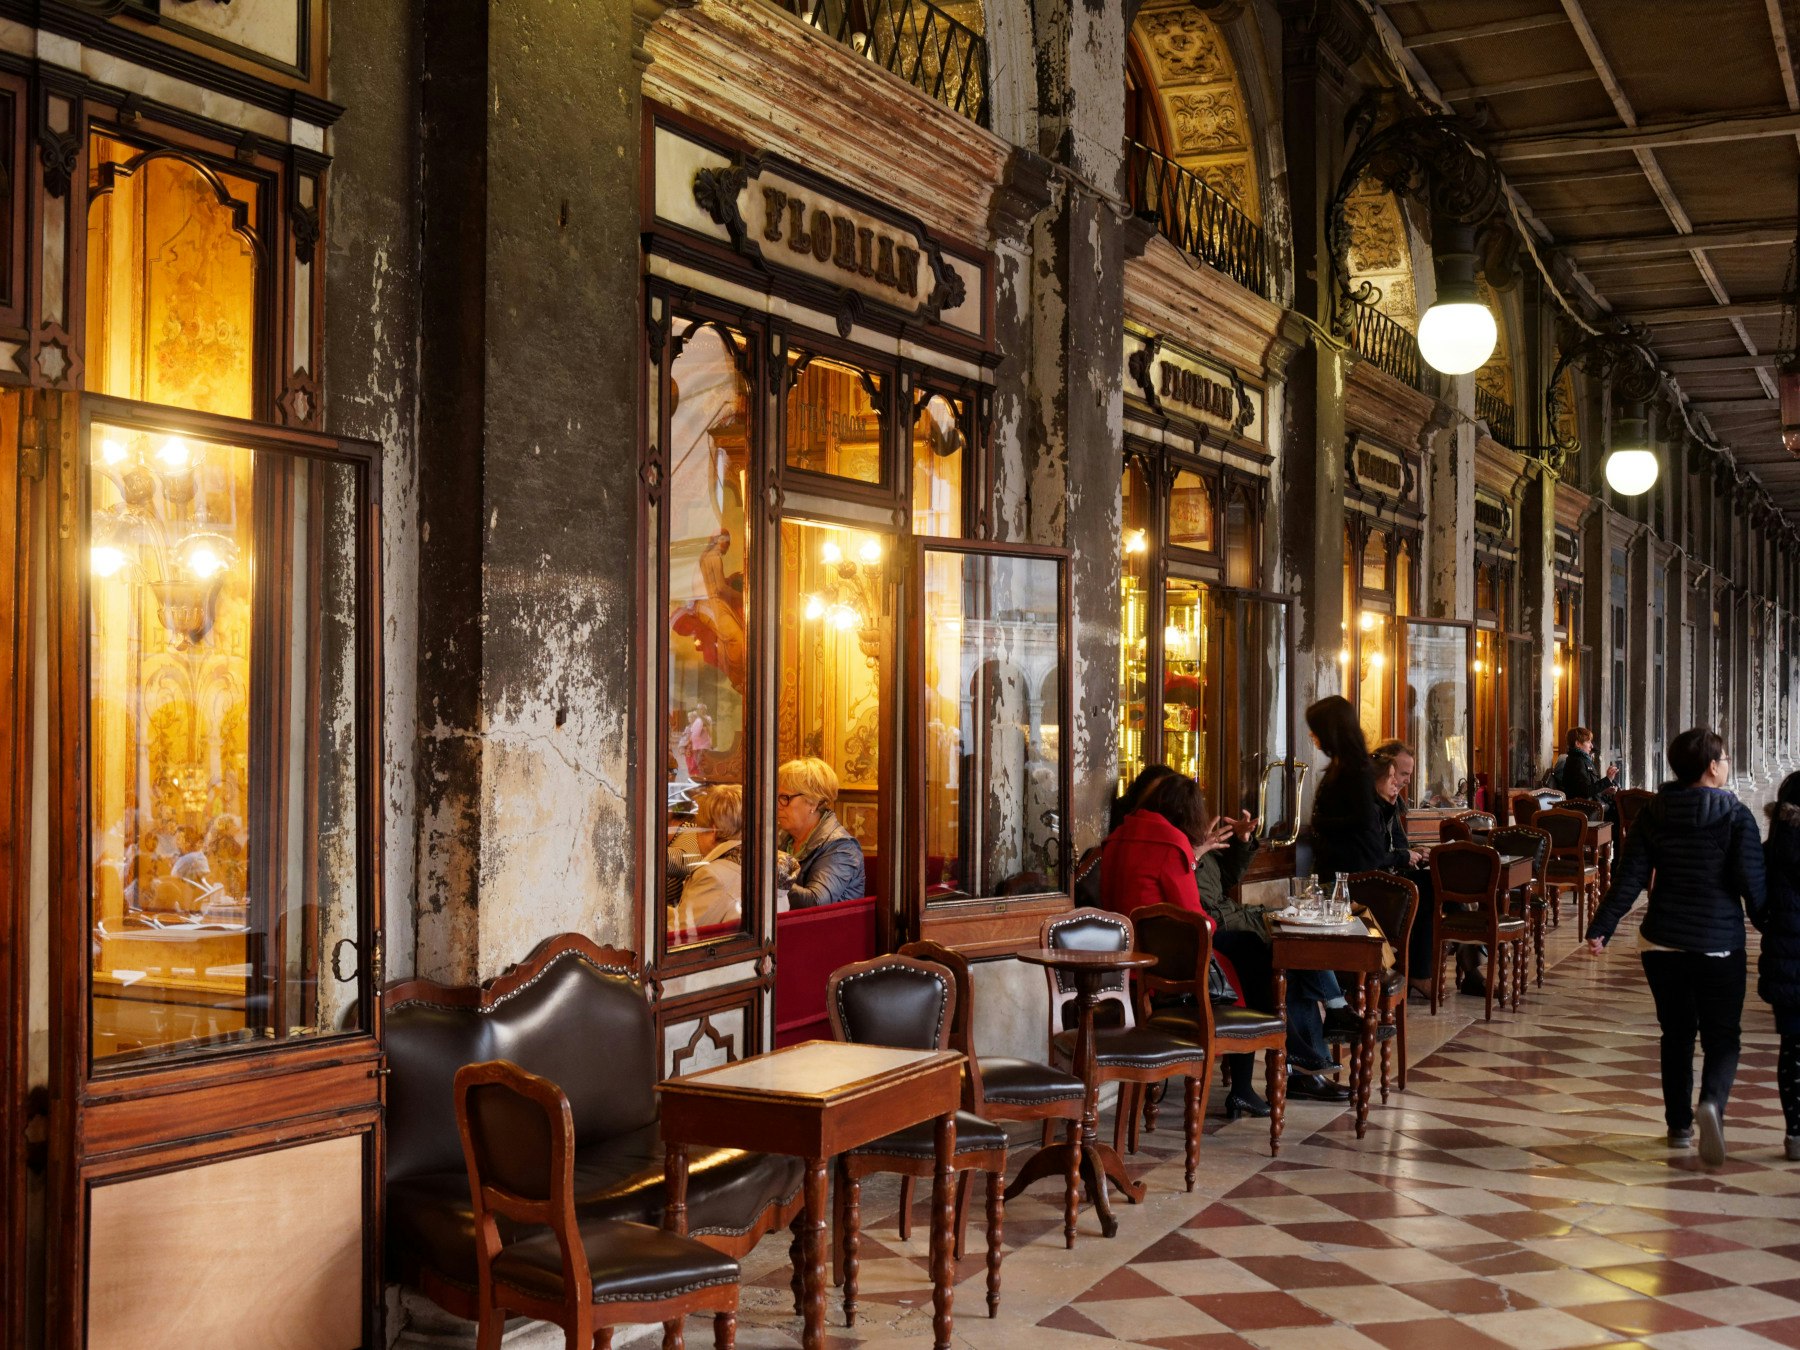 A shot of the front of Caffé Florian in Venice